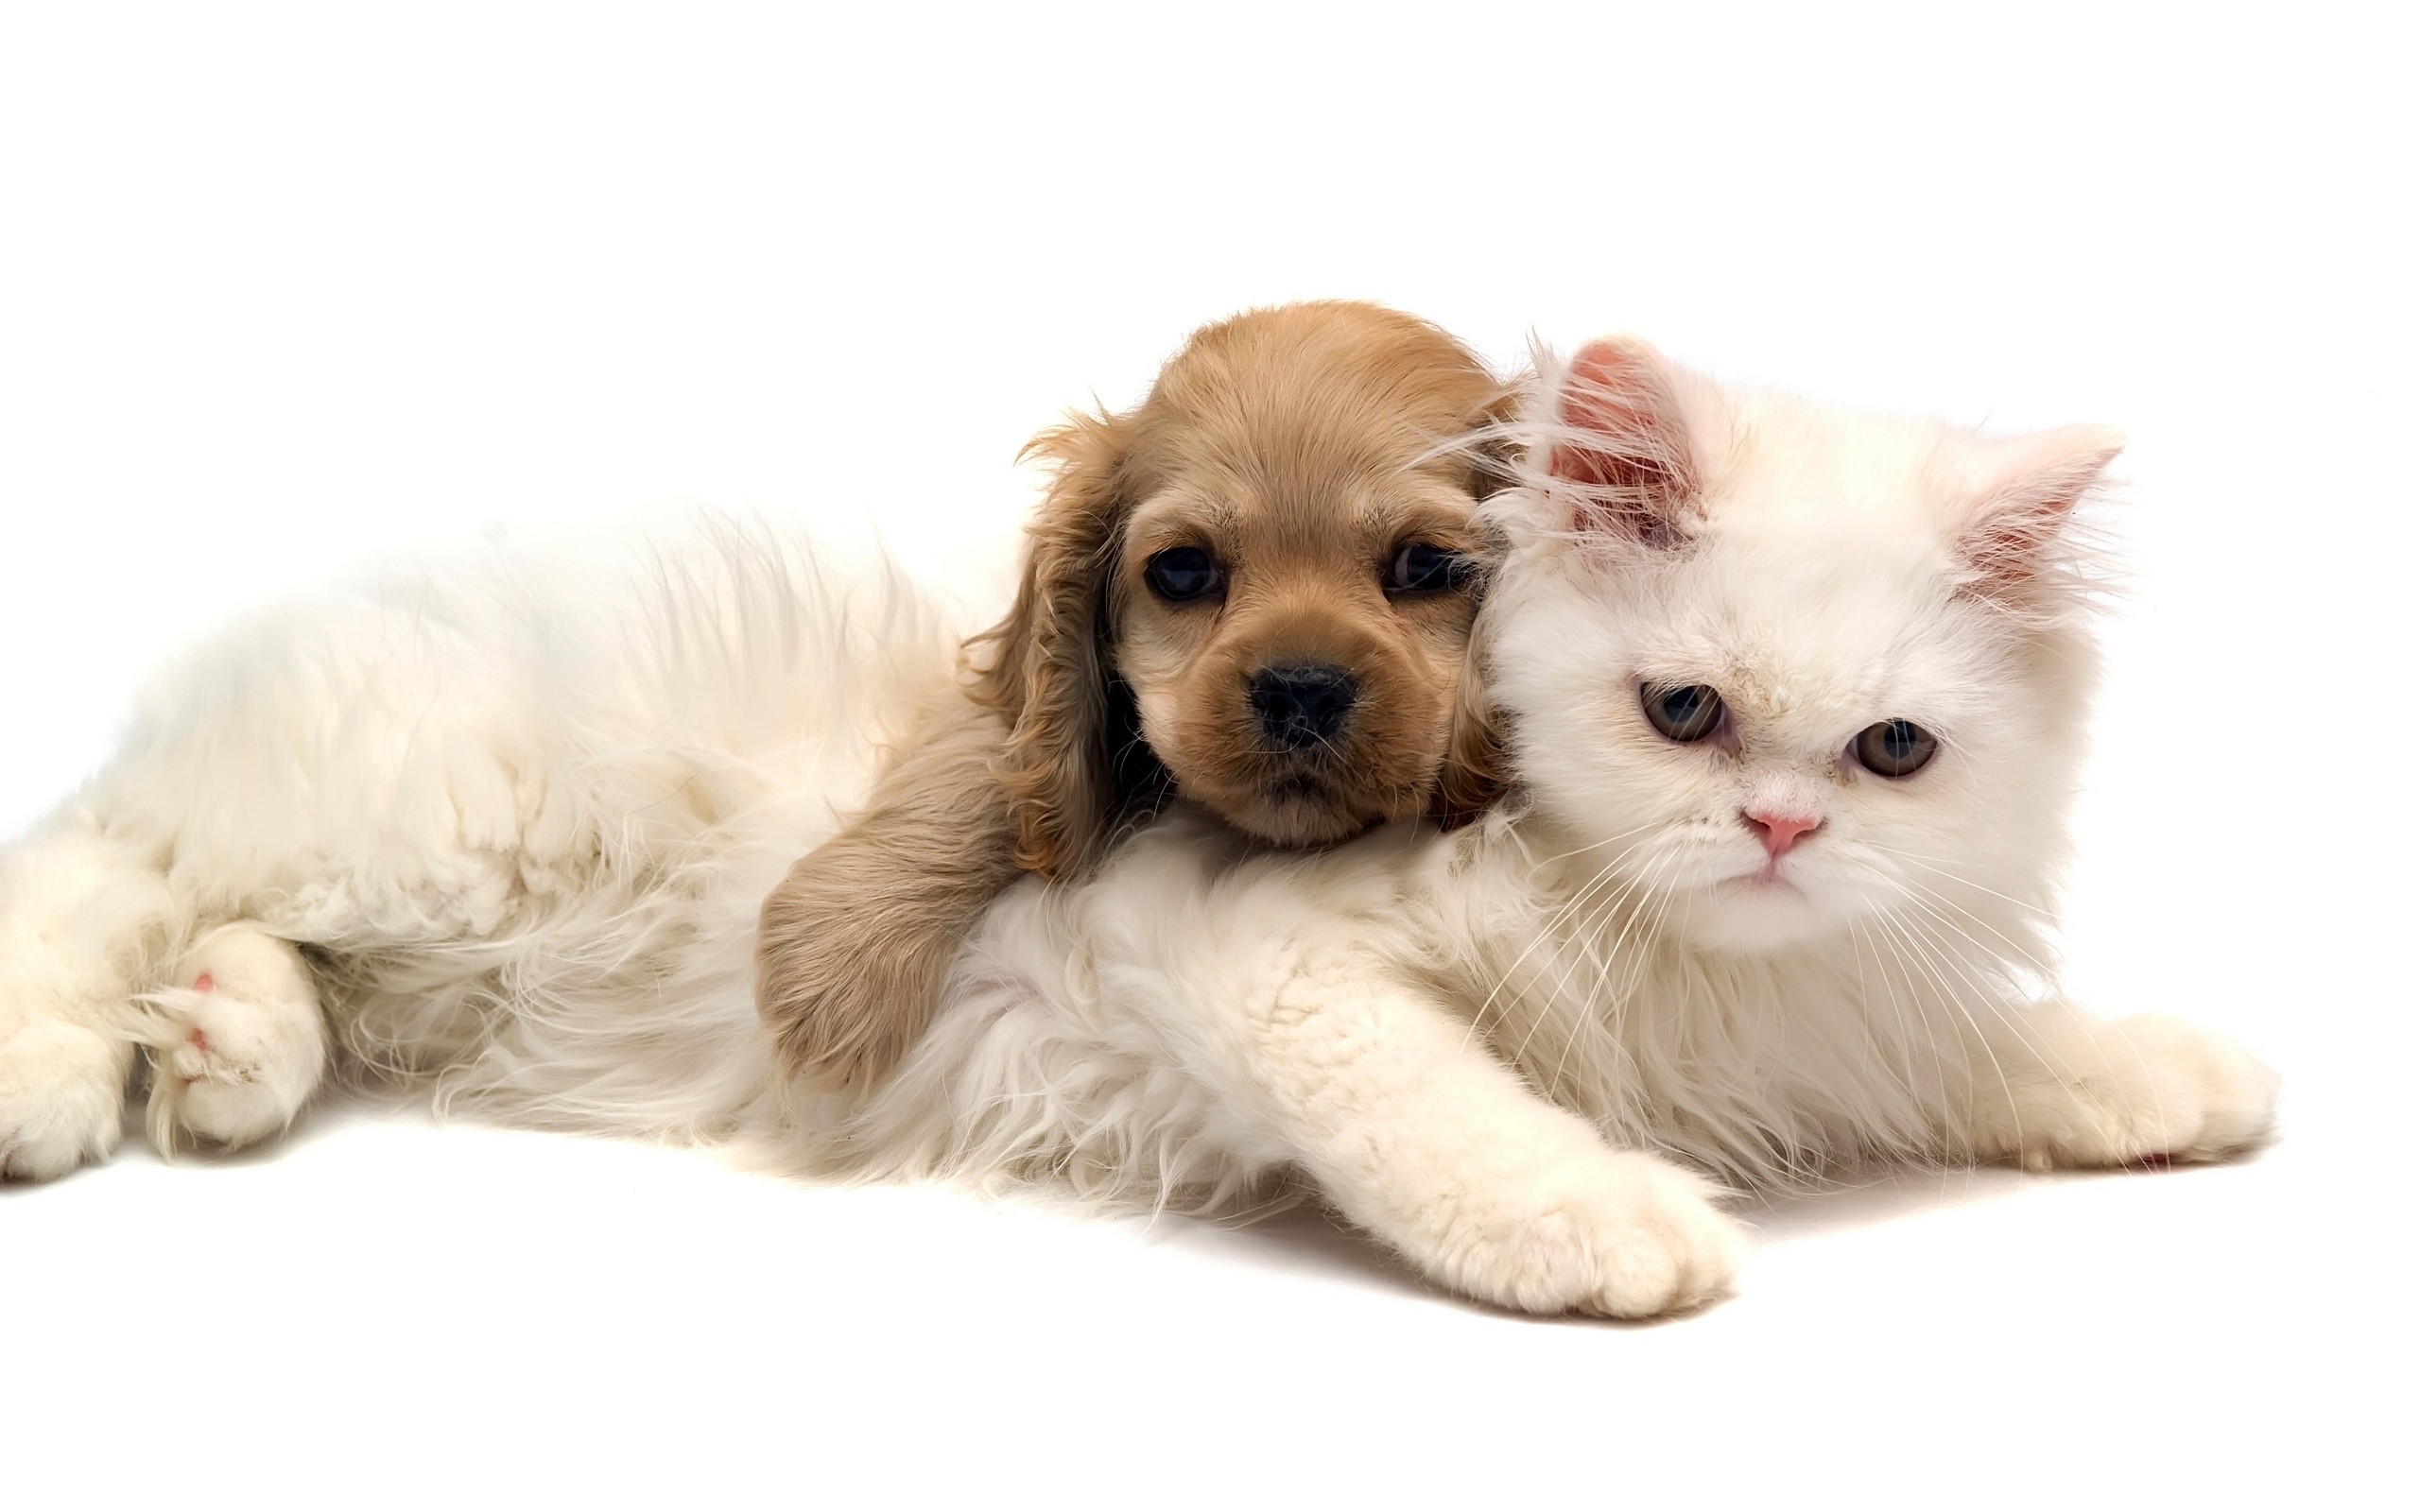 2560x1600 Baby cats and dogs pics wallpaper